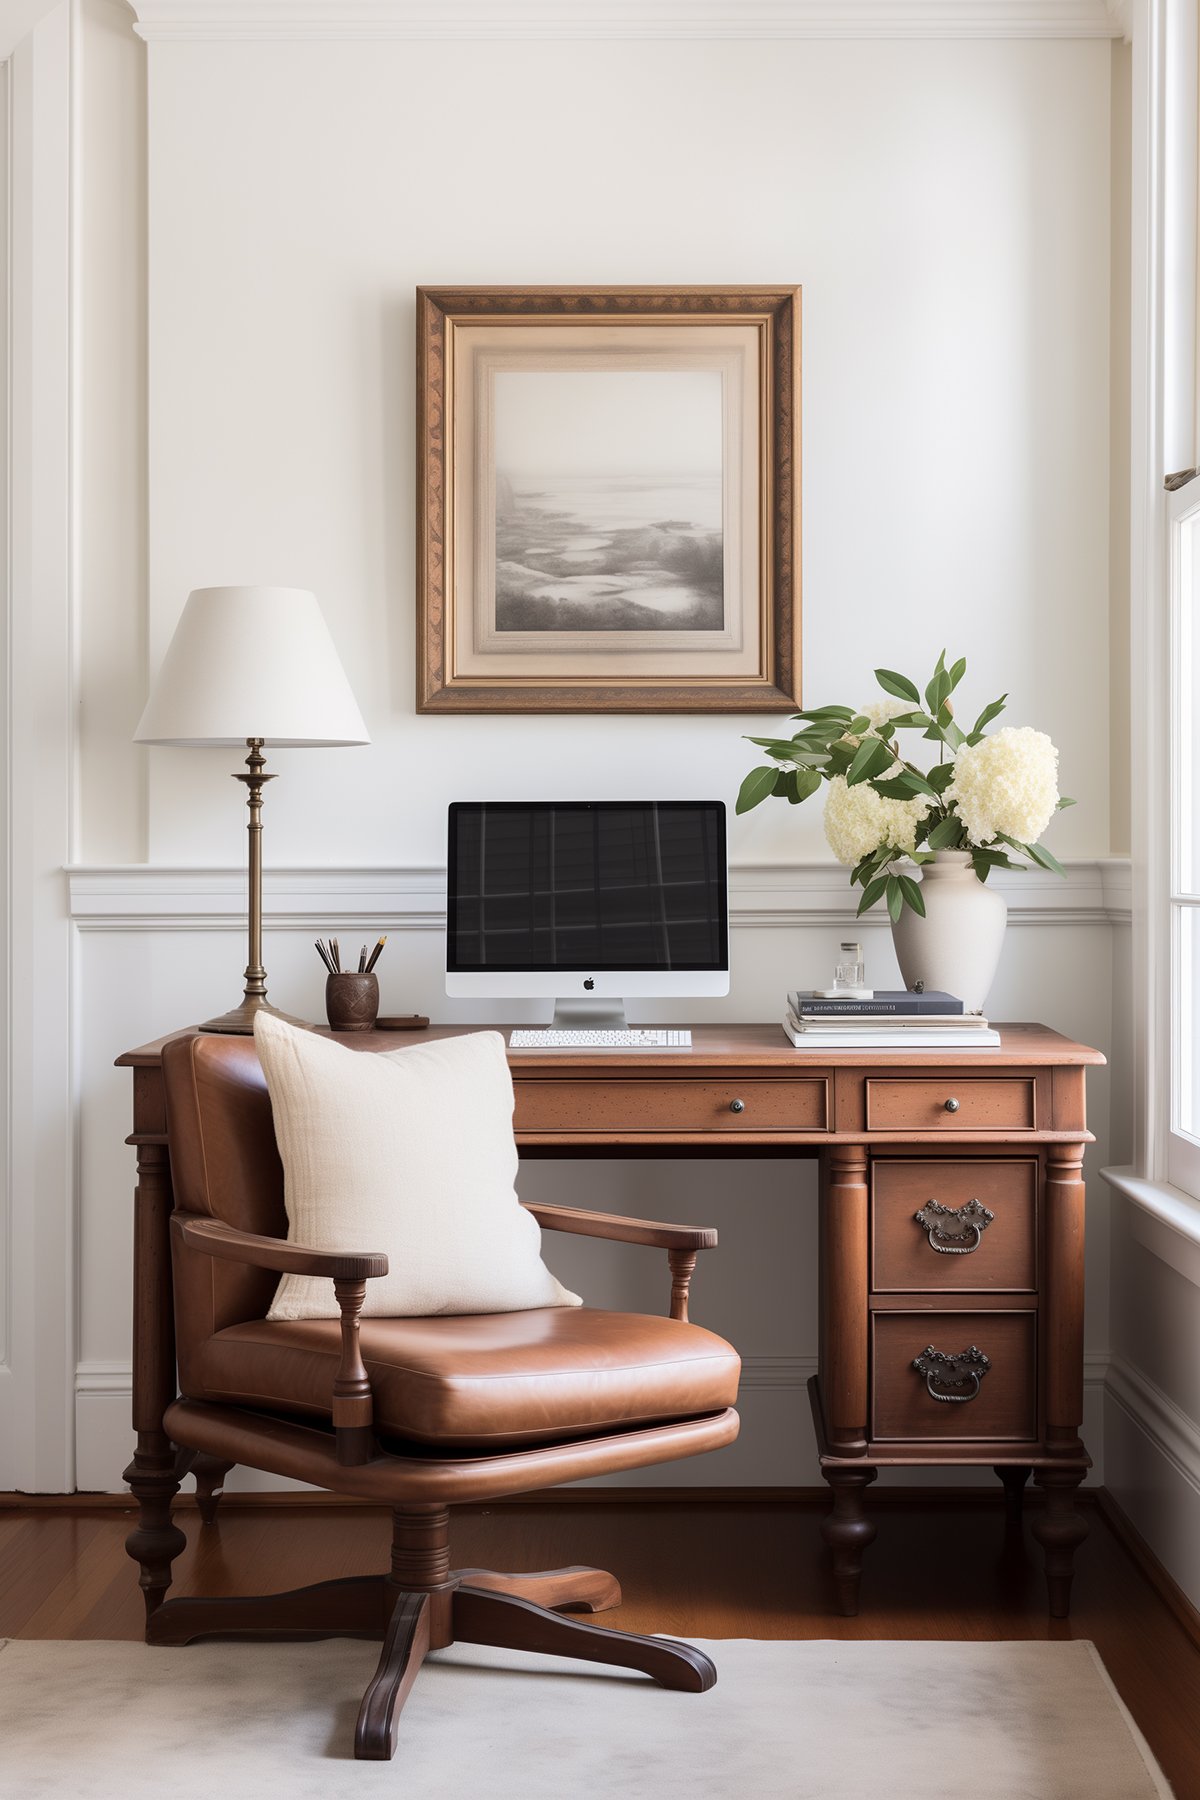 small office with a vintage wooden desk, leather desk chair and vintage lamp and artwork.